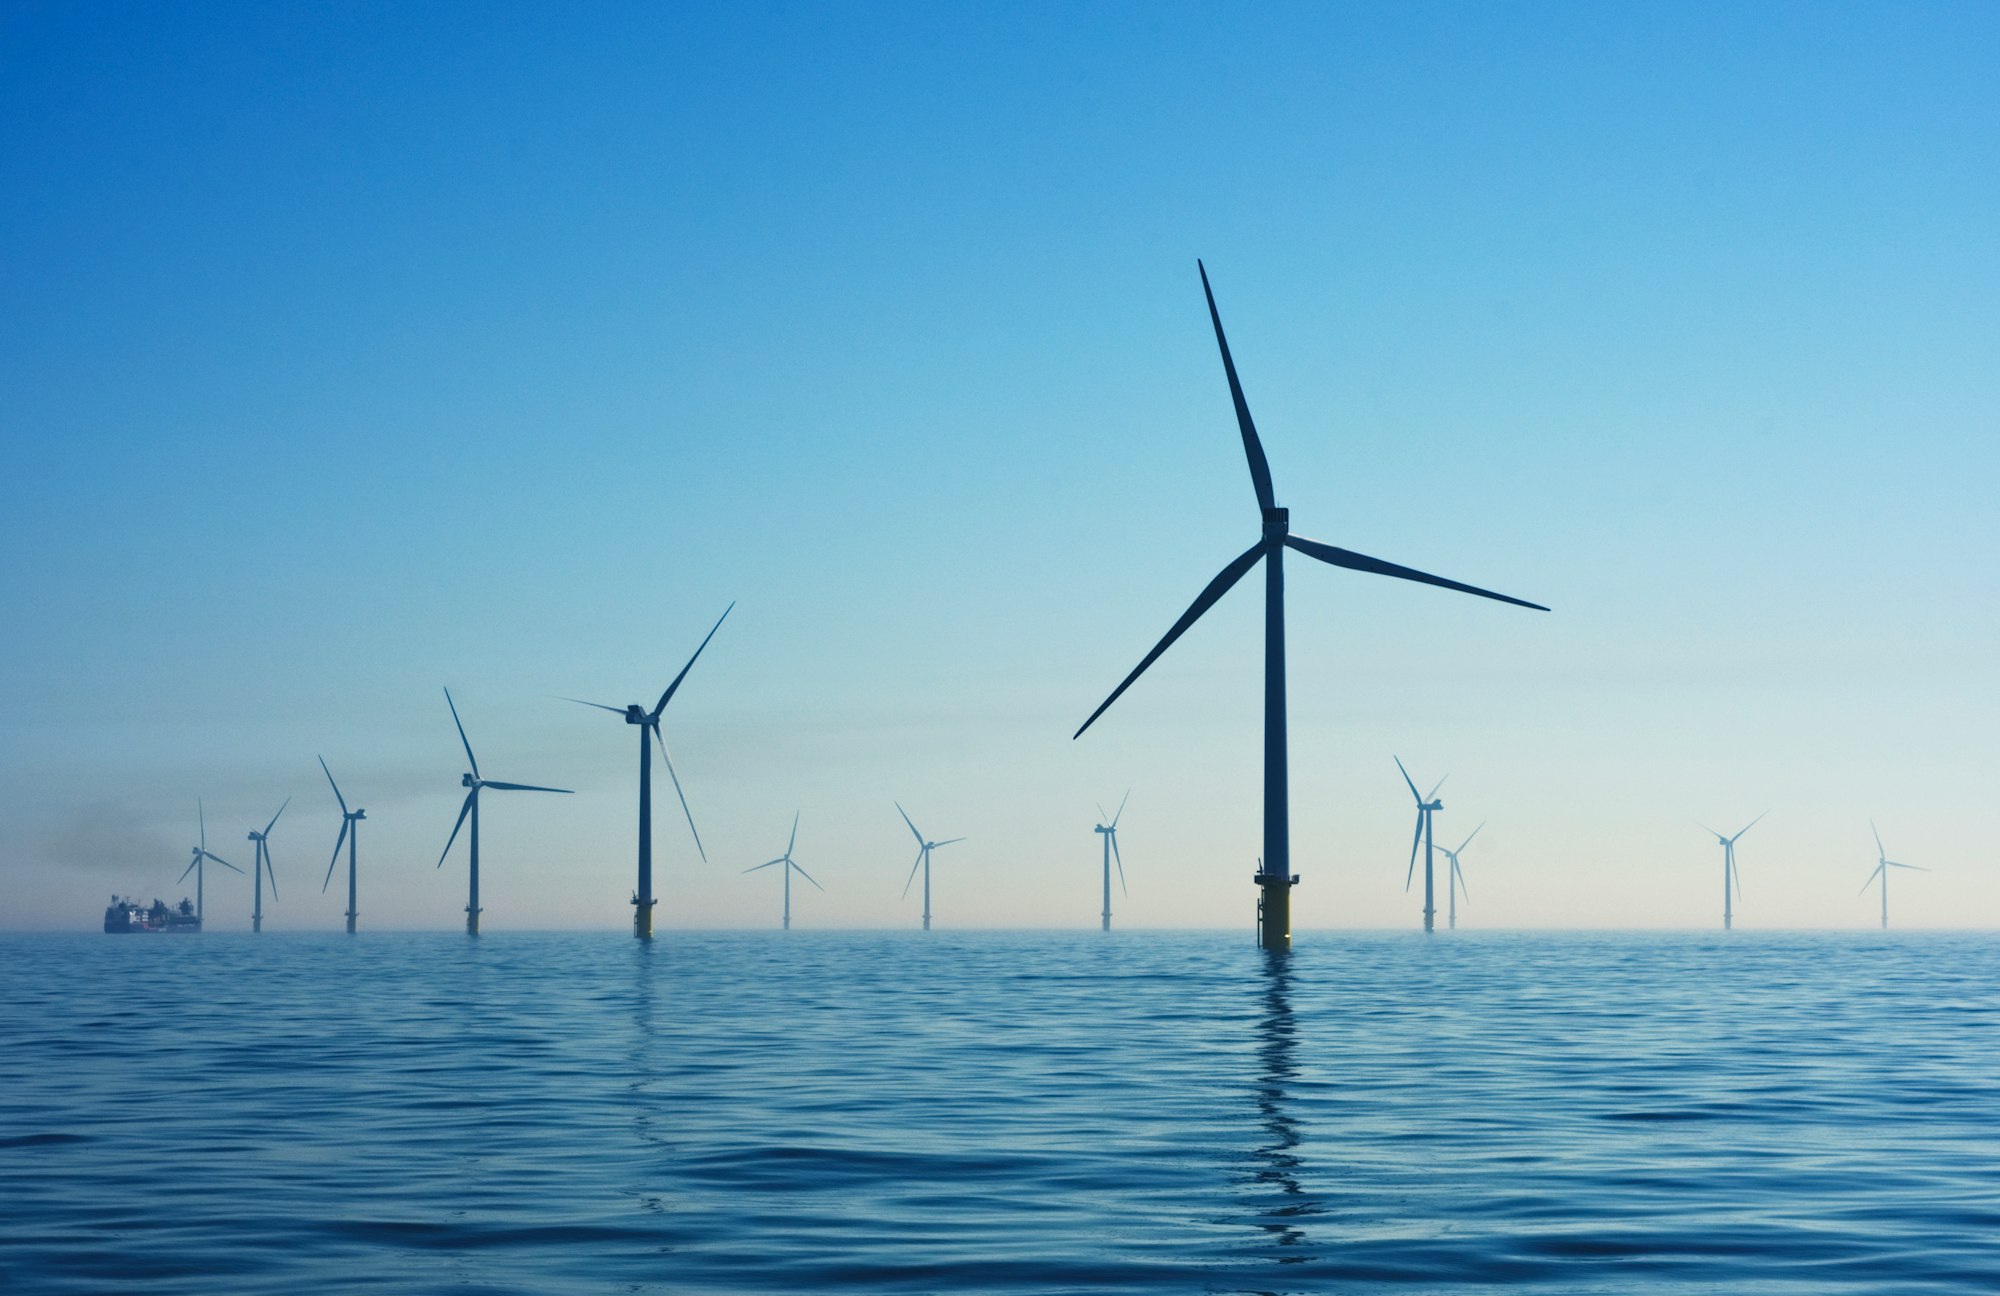 Floating offshore wind turbines: challenges for marine wildlife